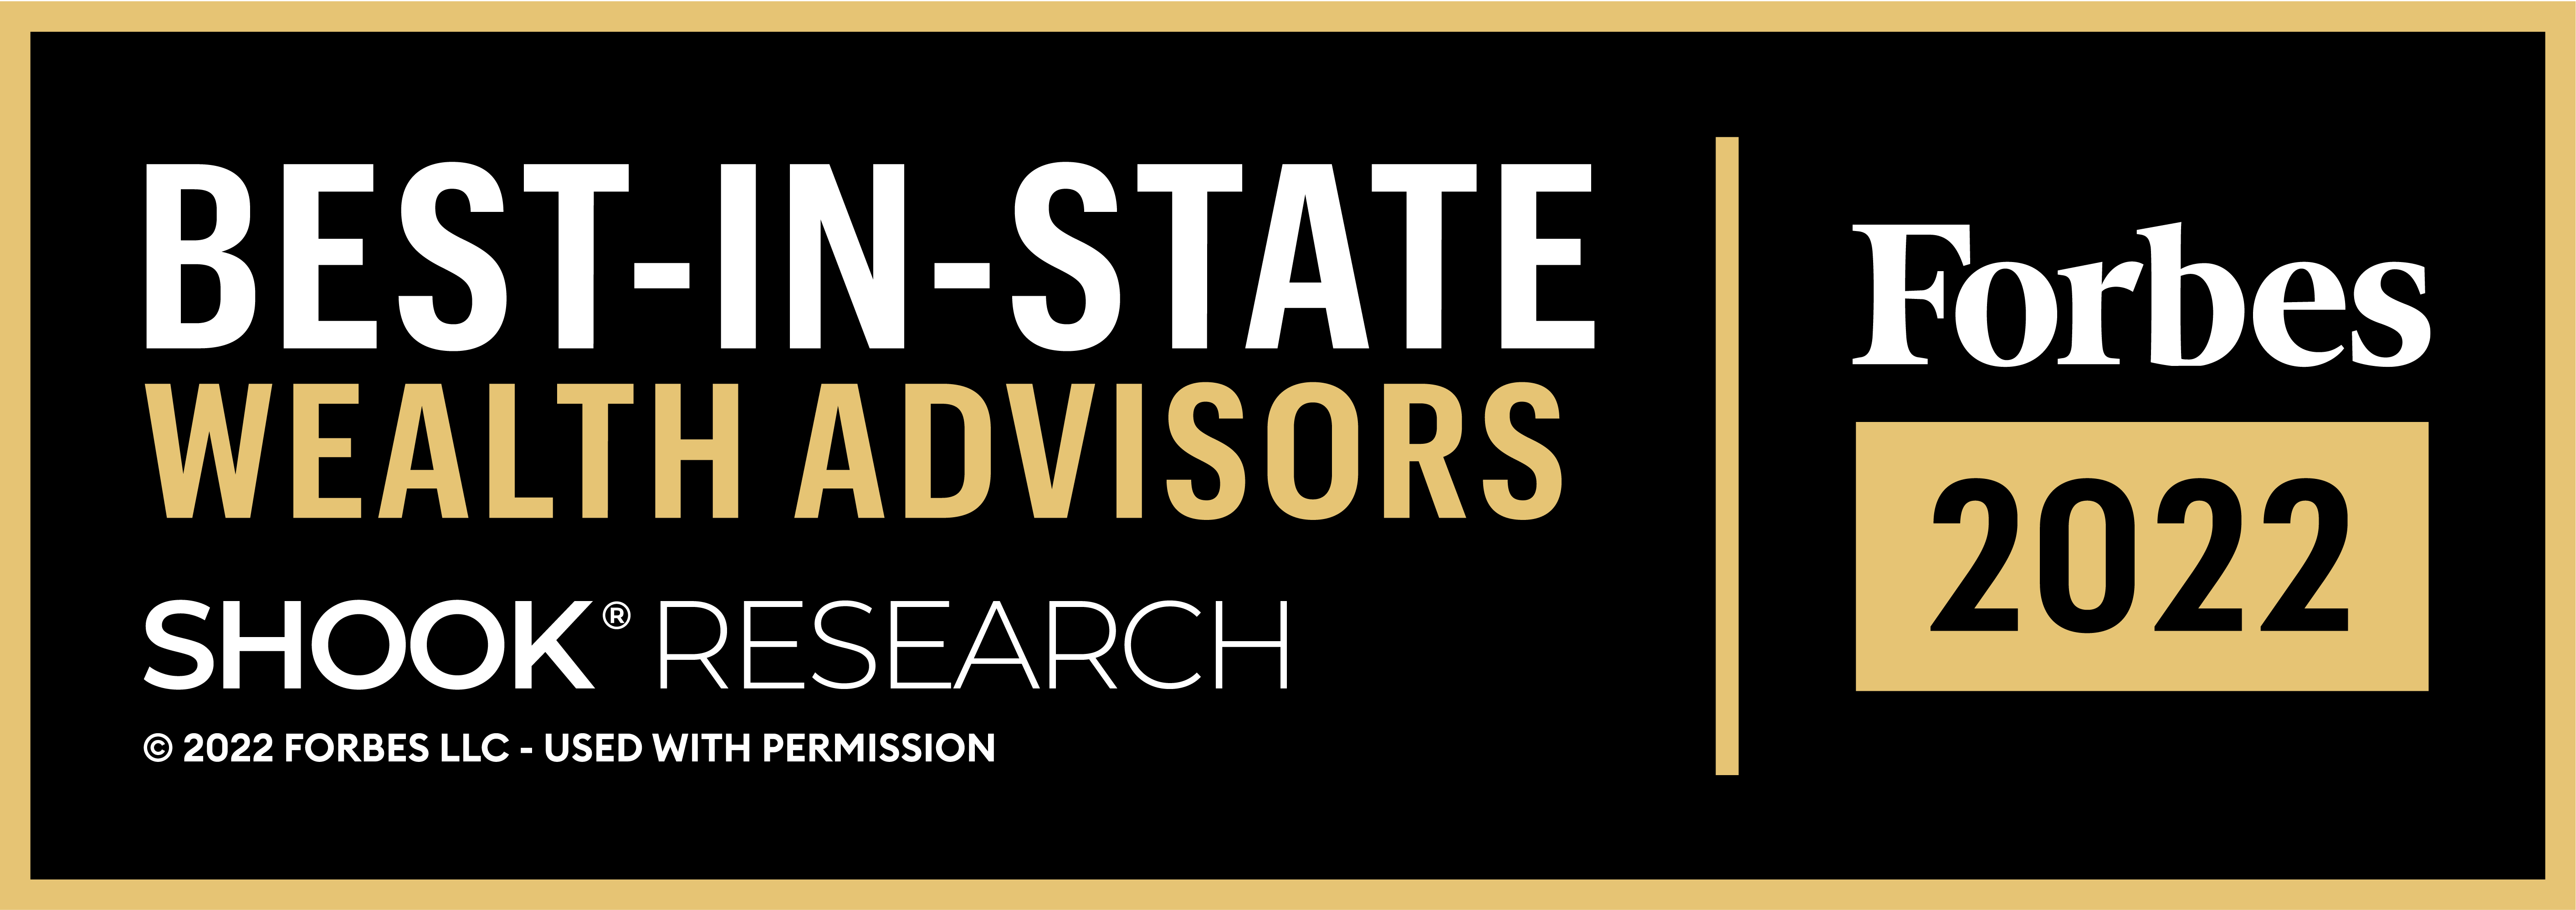 Forbes Best In State Wealth Advisors 2022